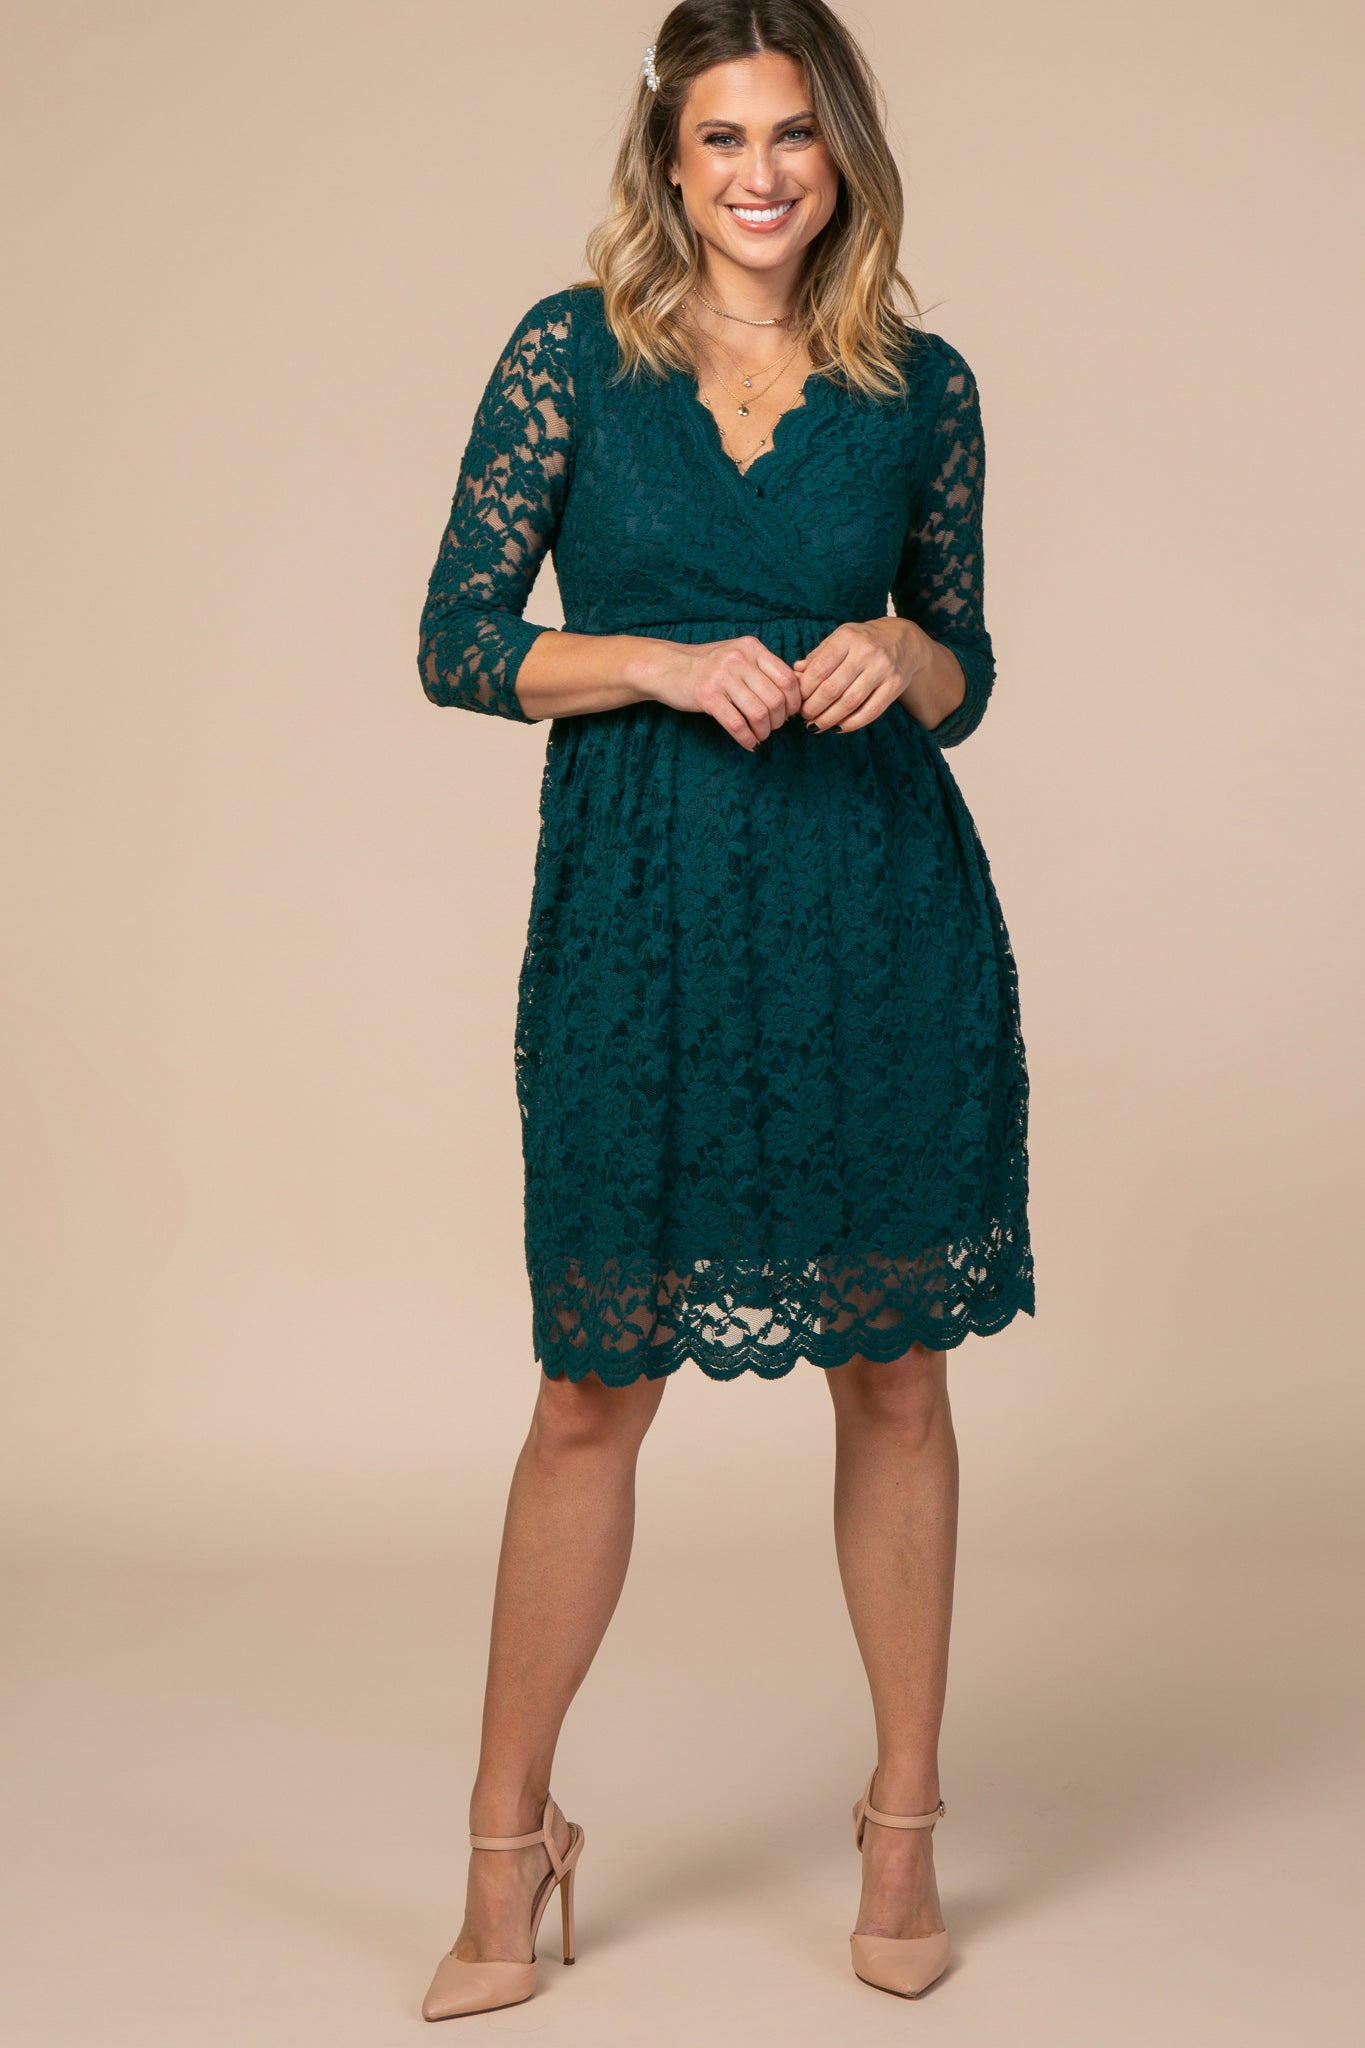 Lace Dress– Wrap PinkBlush Forest Overlay Green